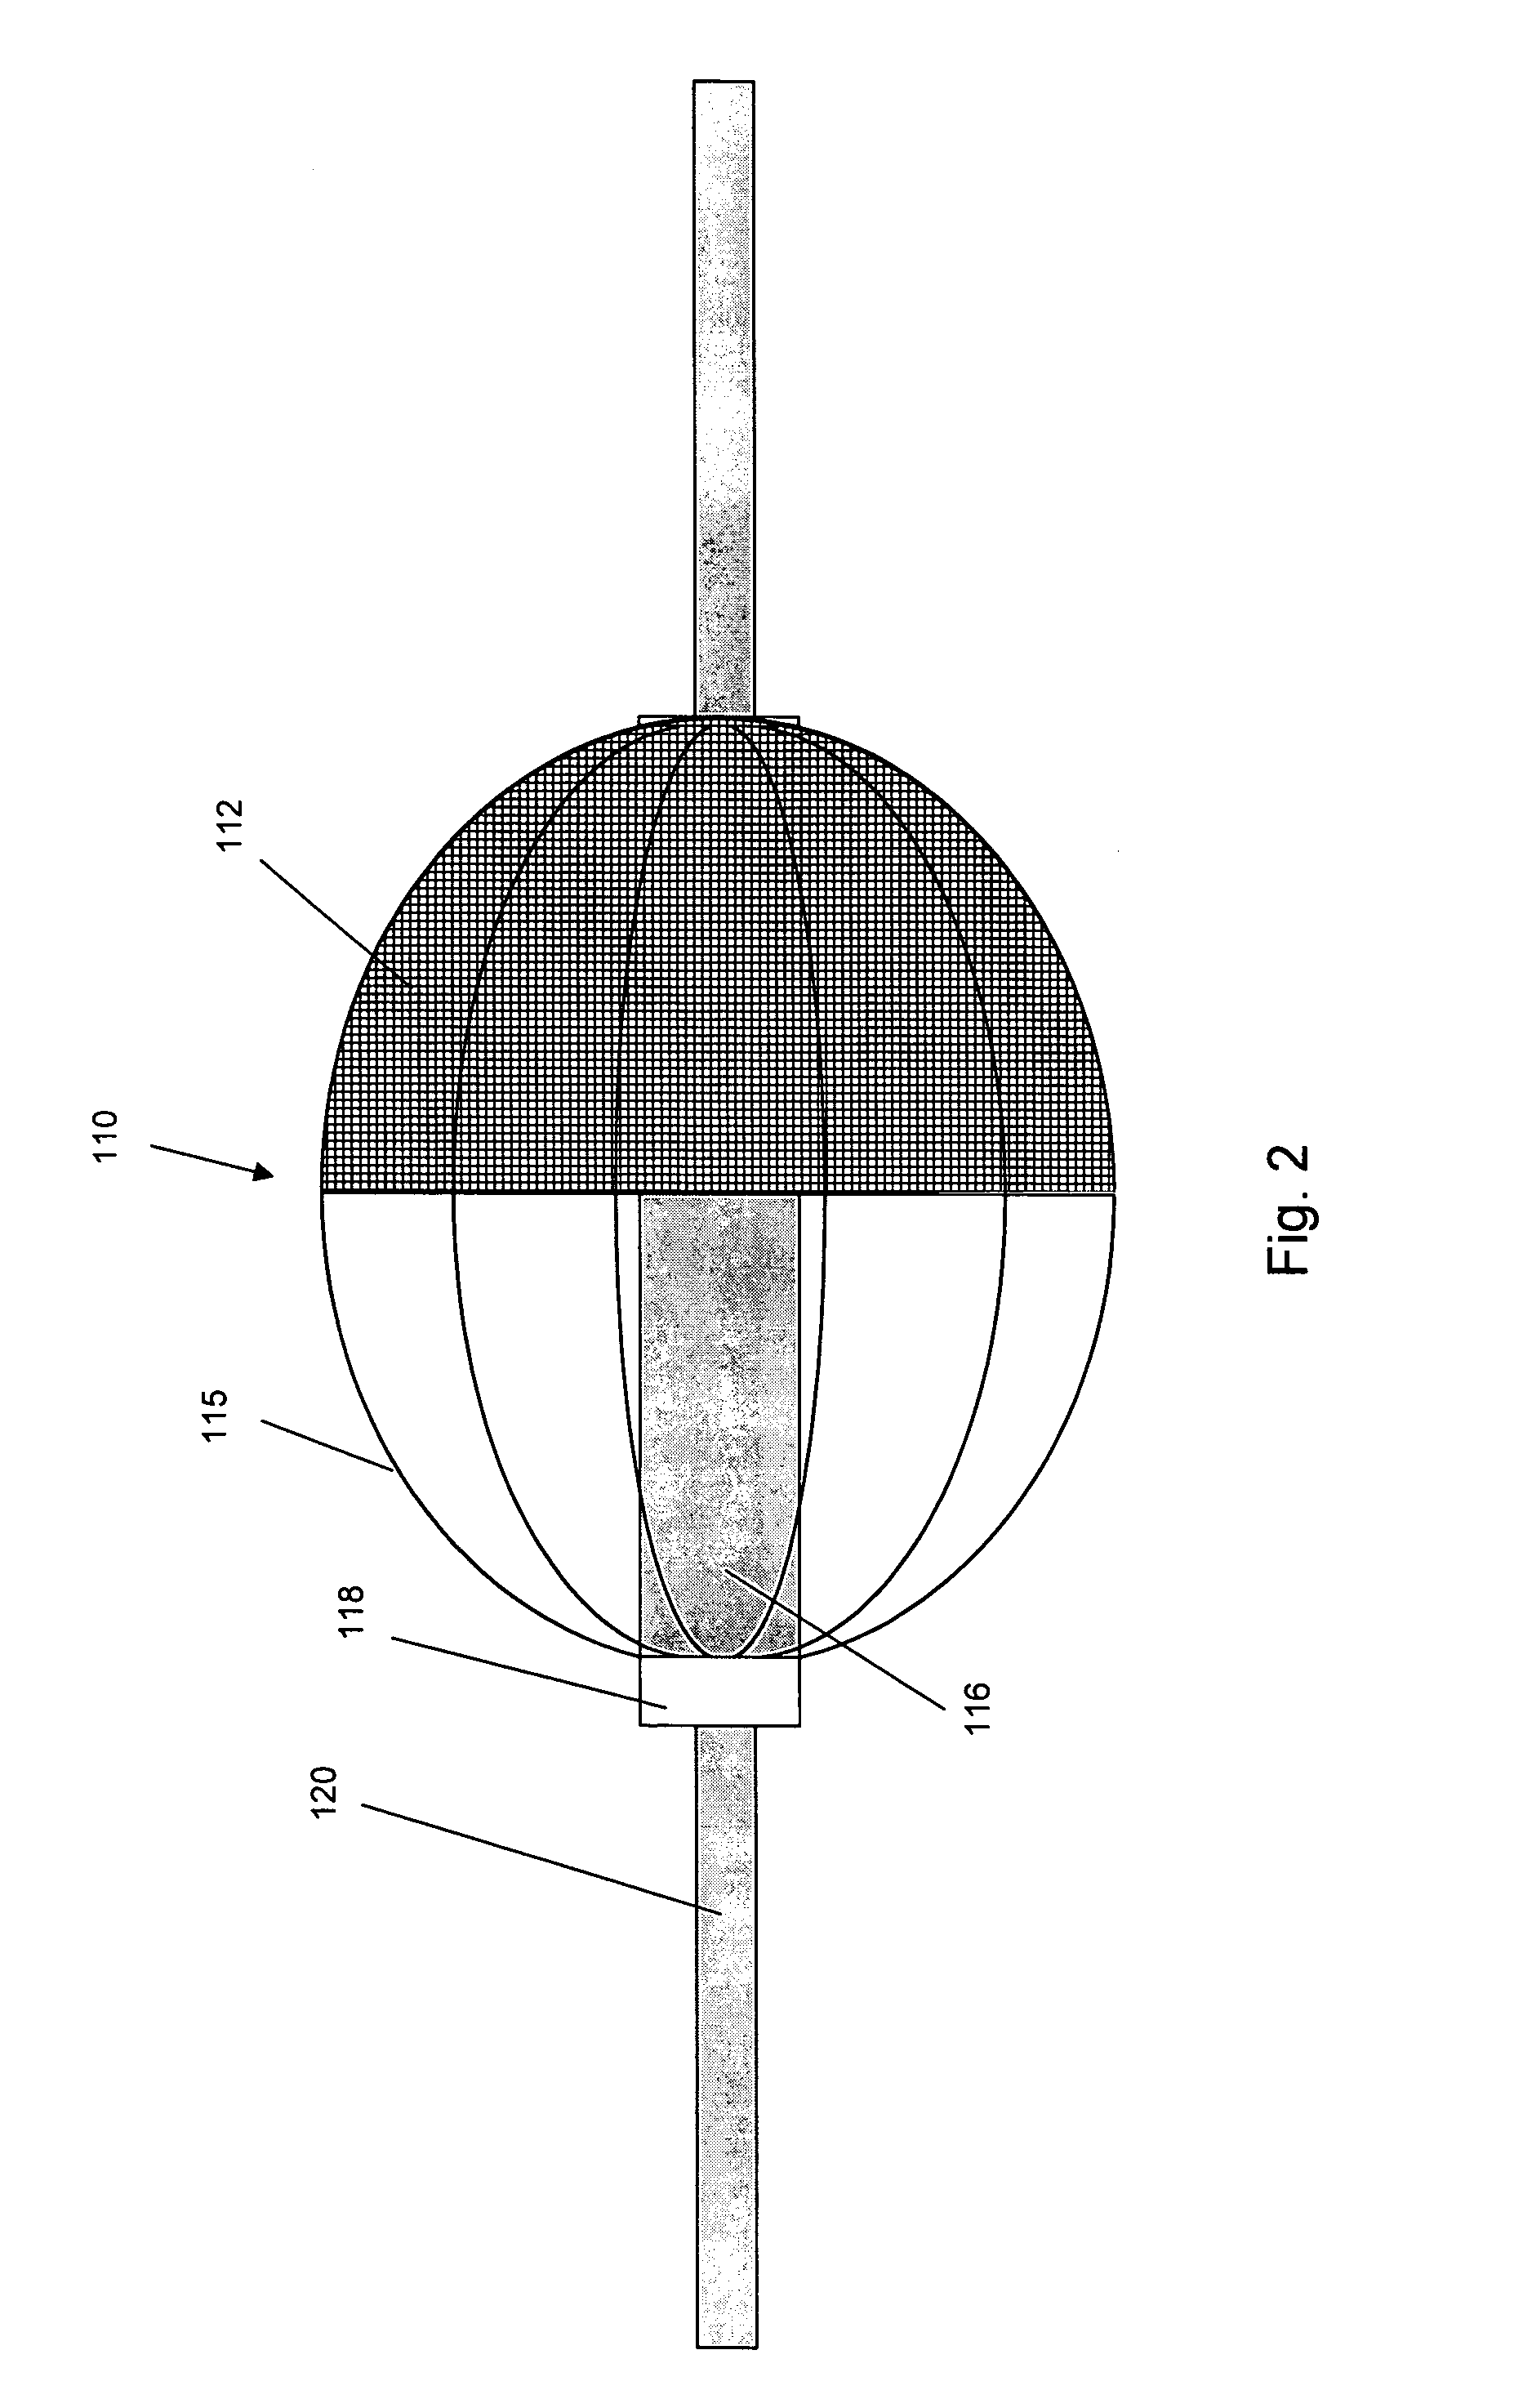 Electroactive polymer actuated medical devices